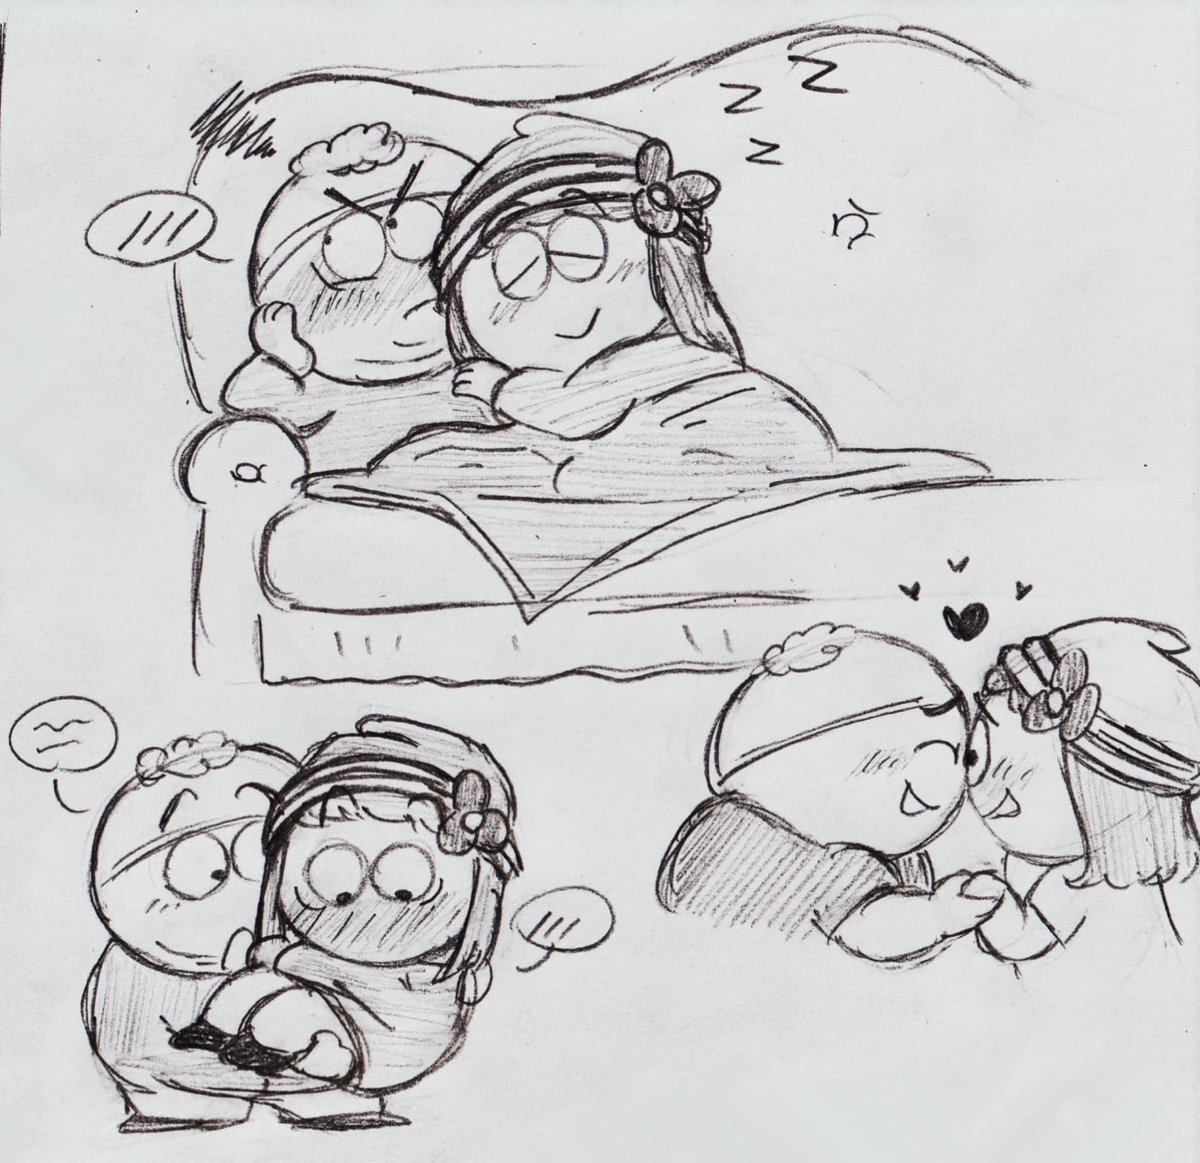 They had some cute moments ♥️

Request for #heiman #spcartman #spheidi